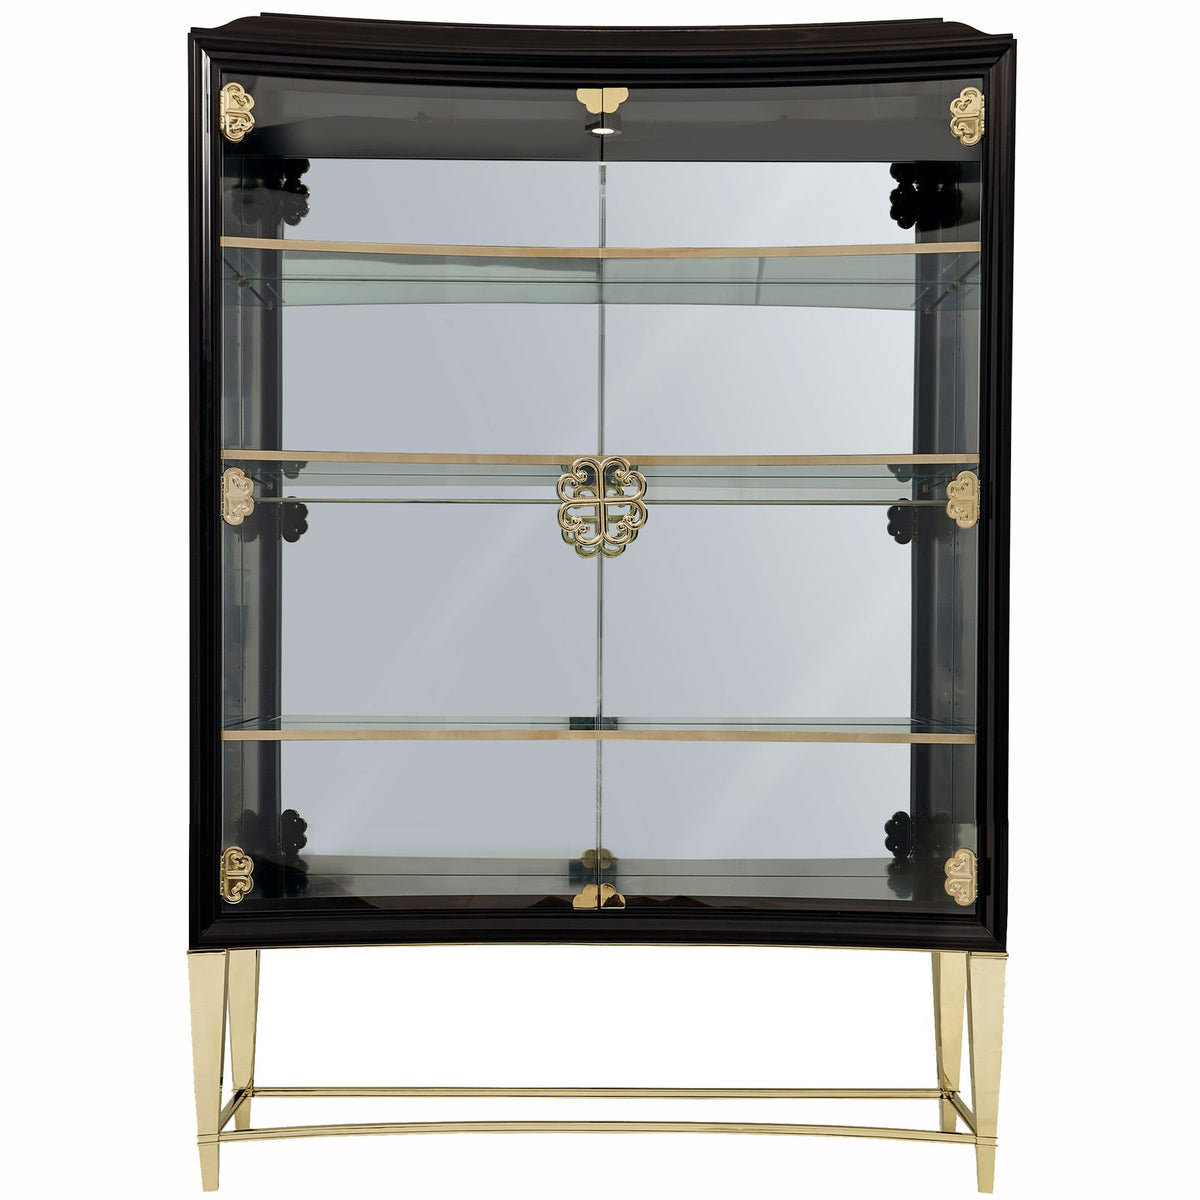 The Connoisseurs Display Cabinet